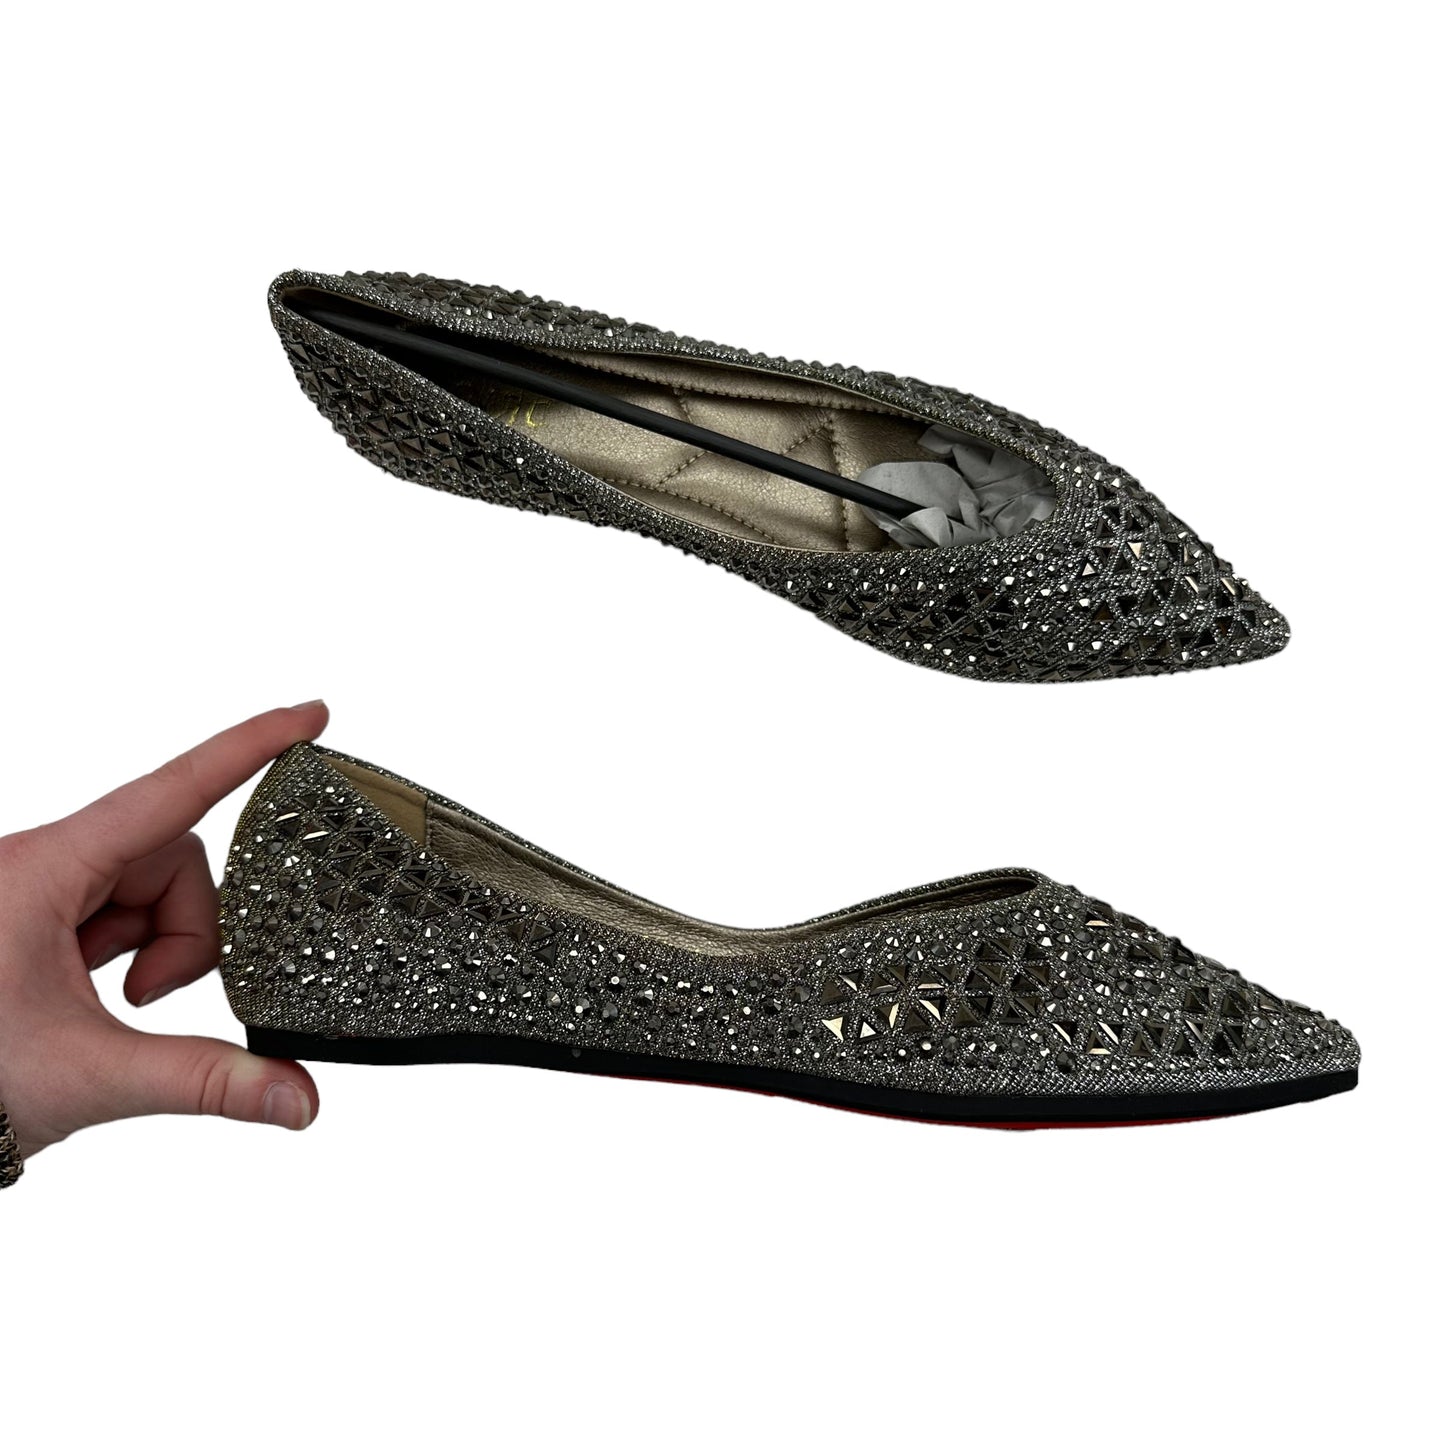 Shoes Flats By Clothes Mentor  Size: 9.5